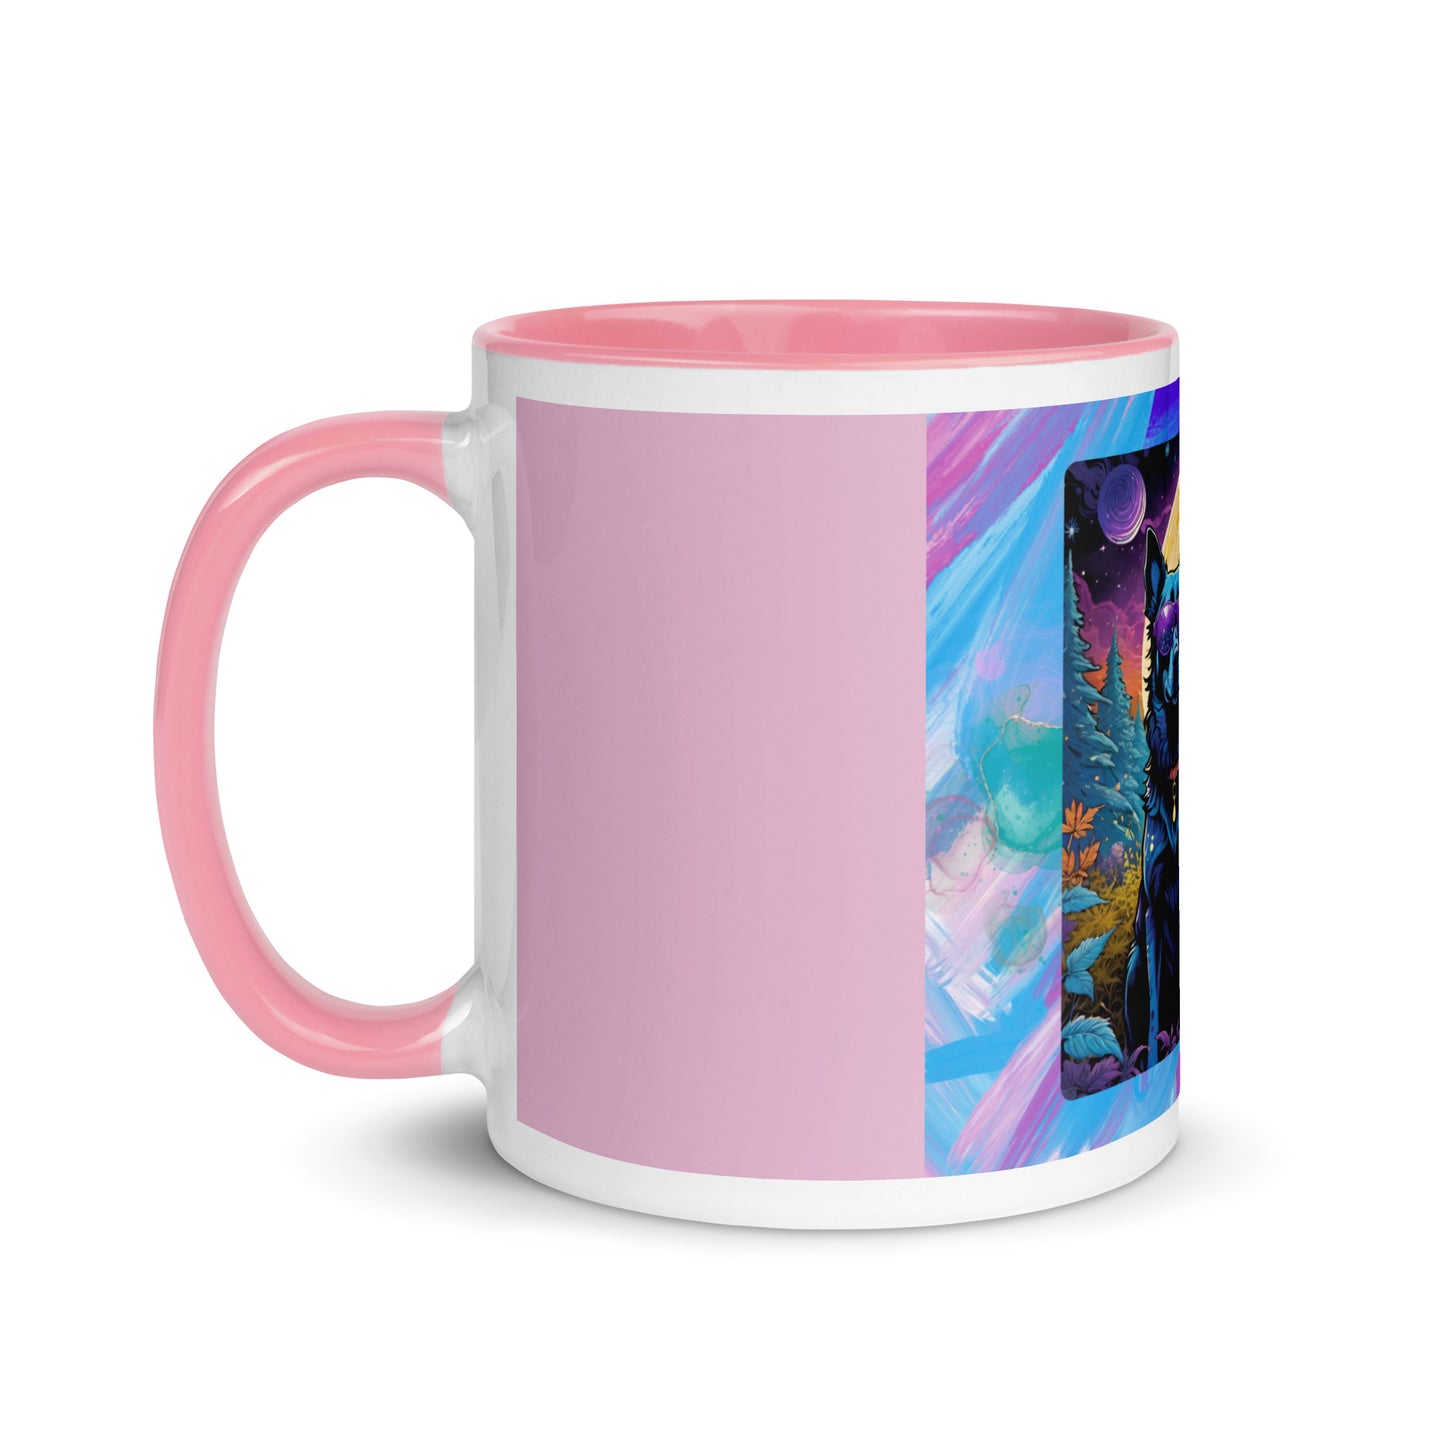 Intergalactic Space Dogs with Sunglasses Mug with Color Inside